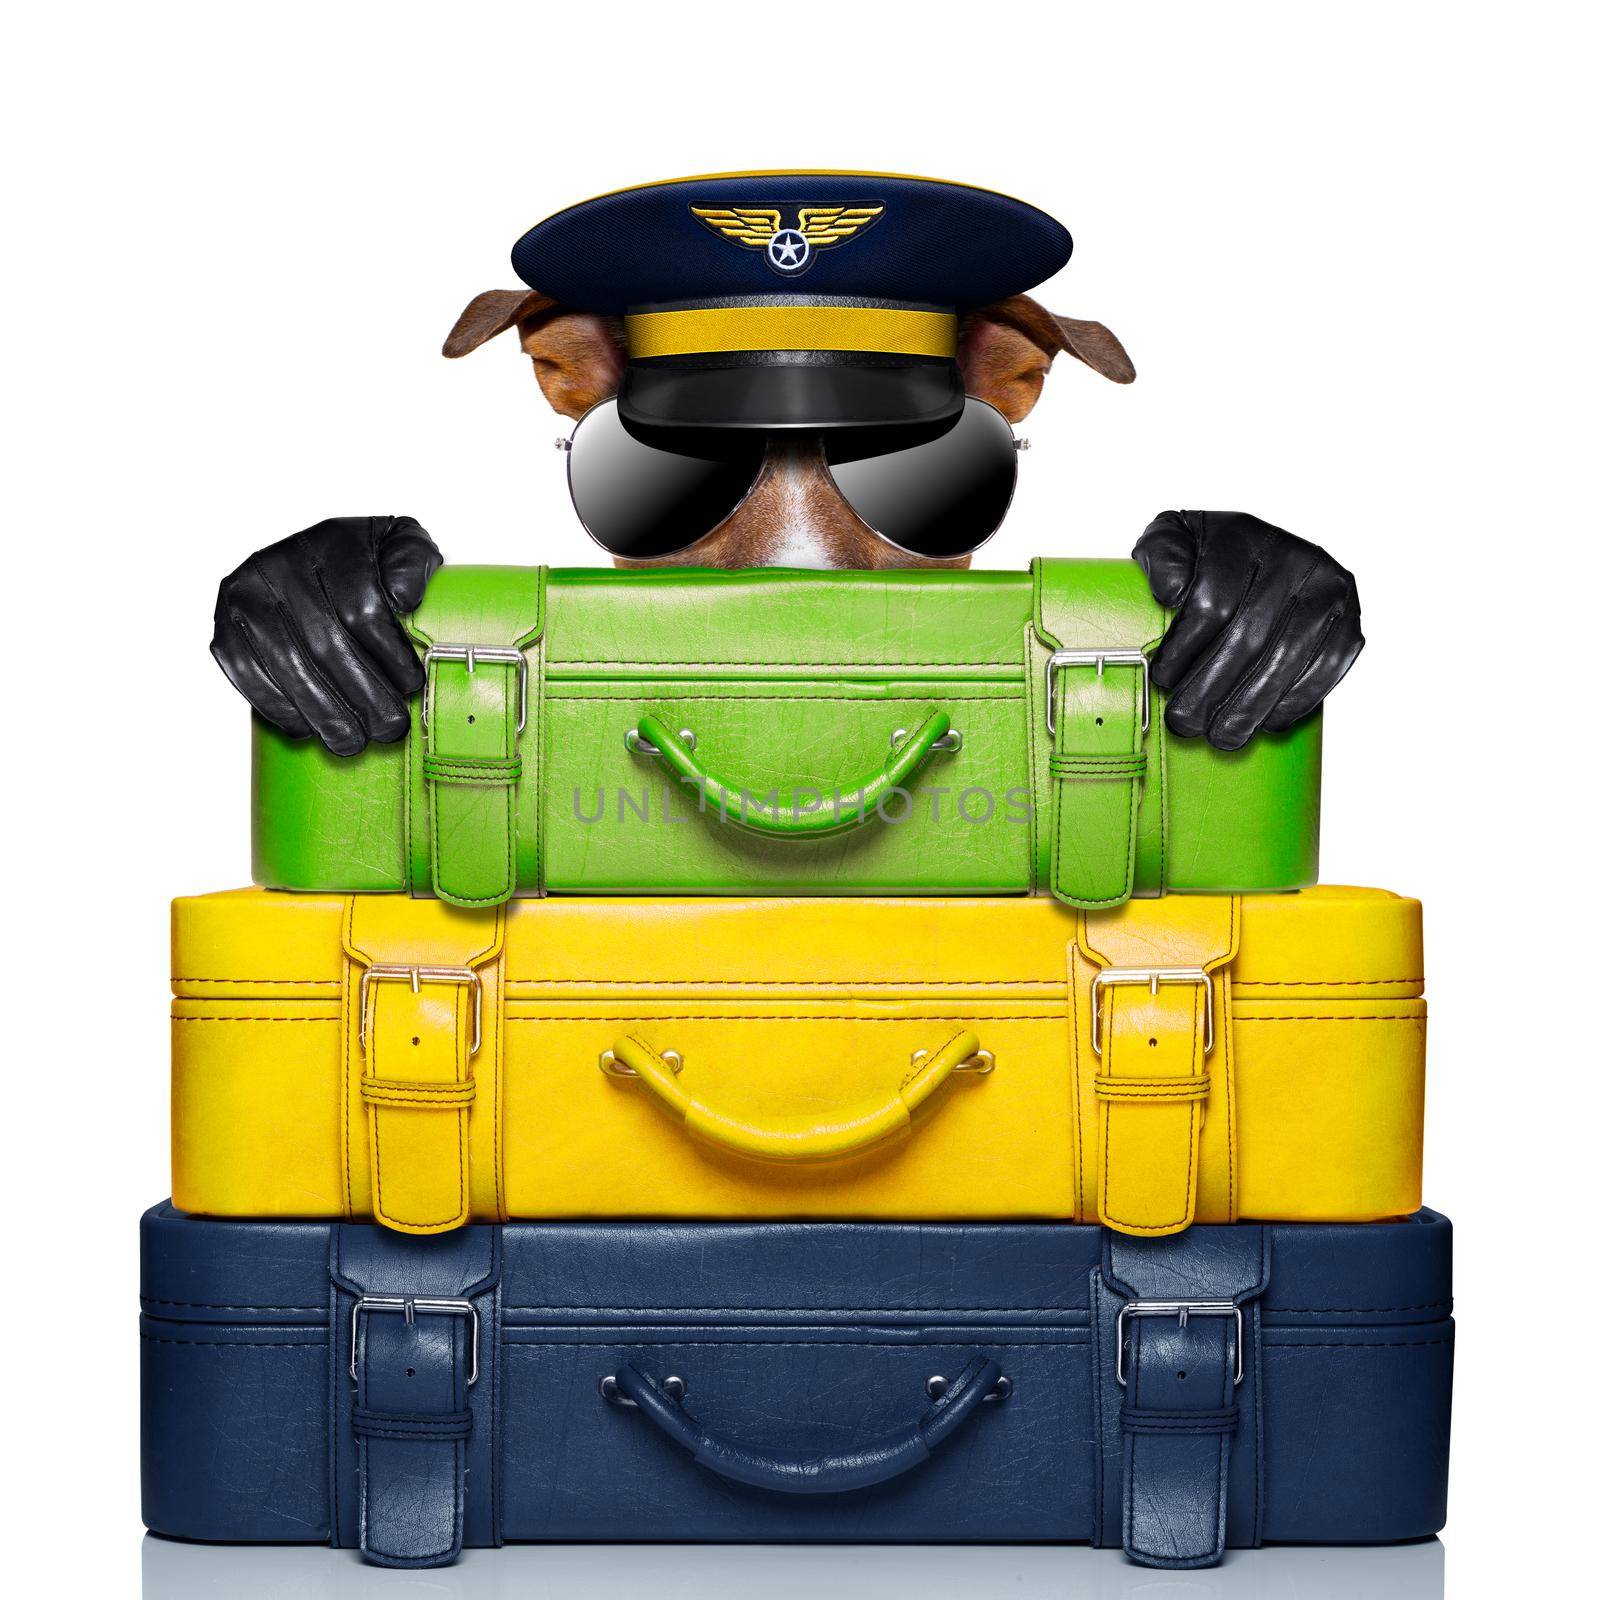 luggage captain dog by Brosch